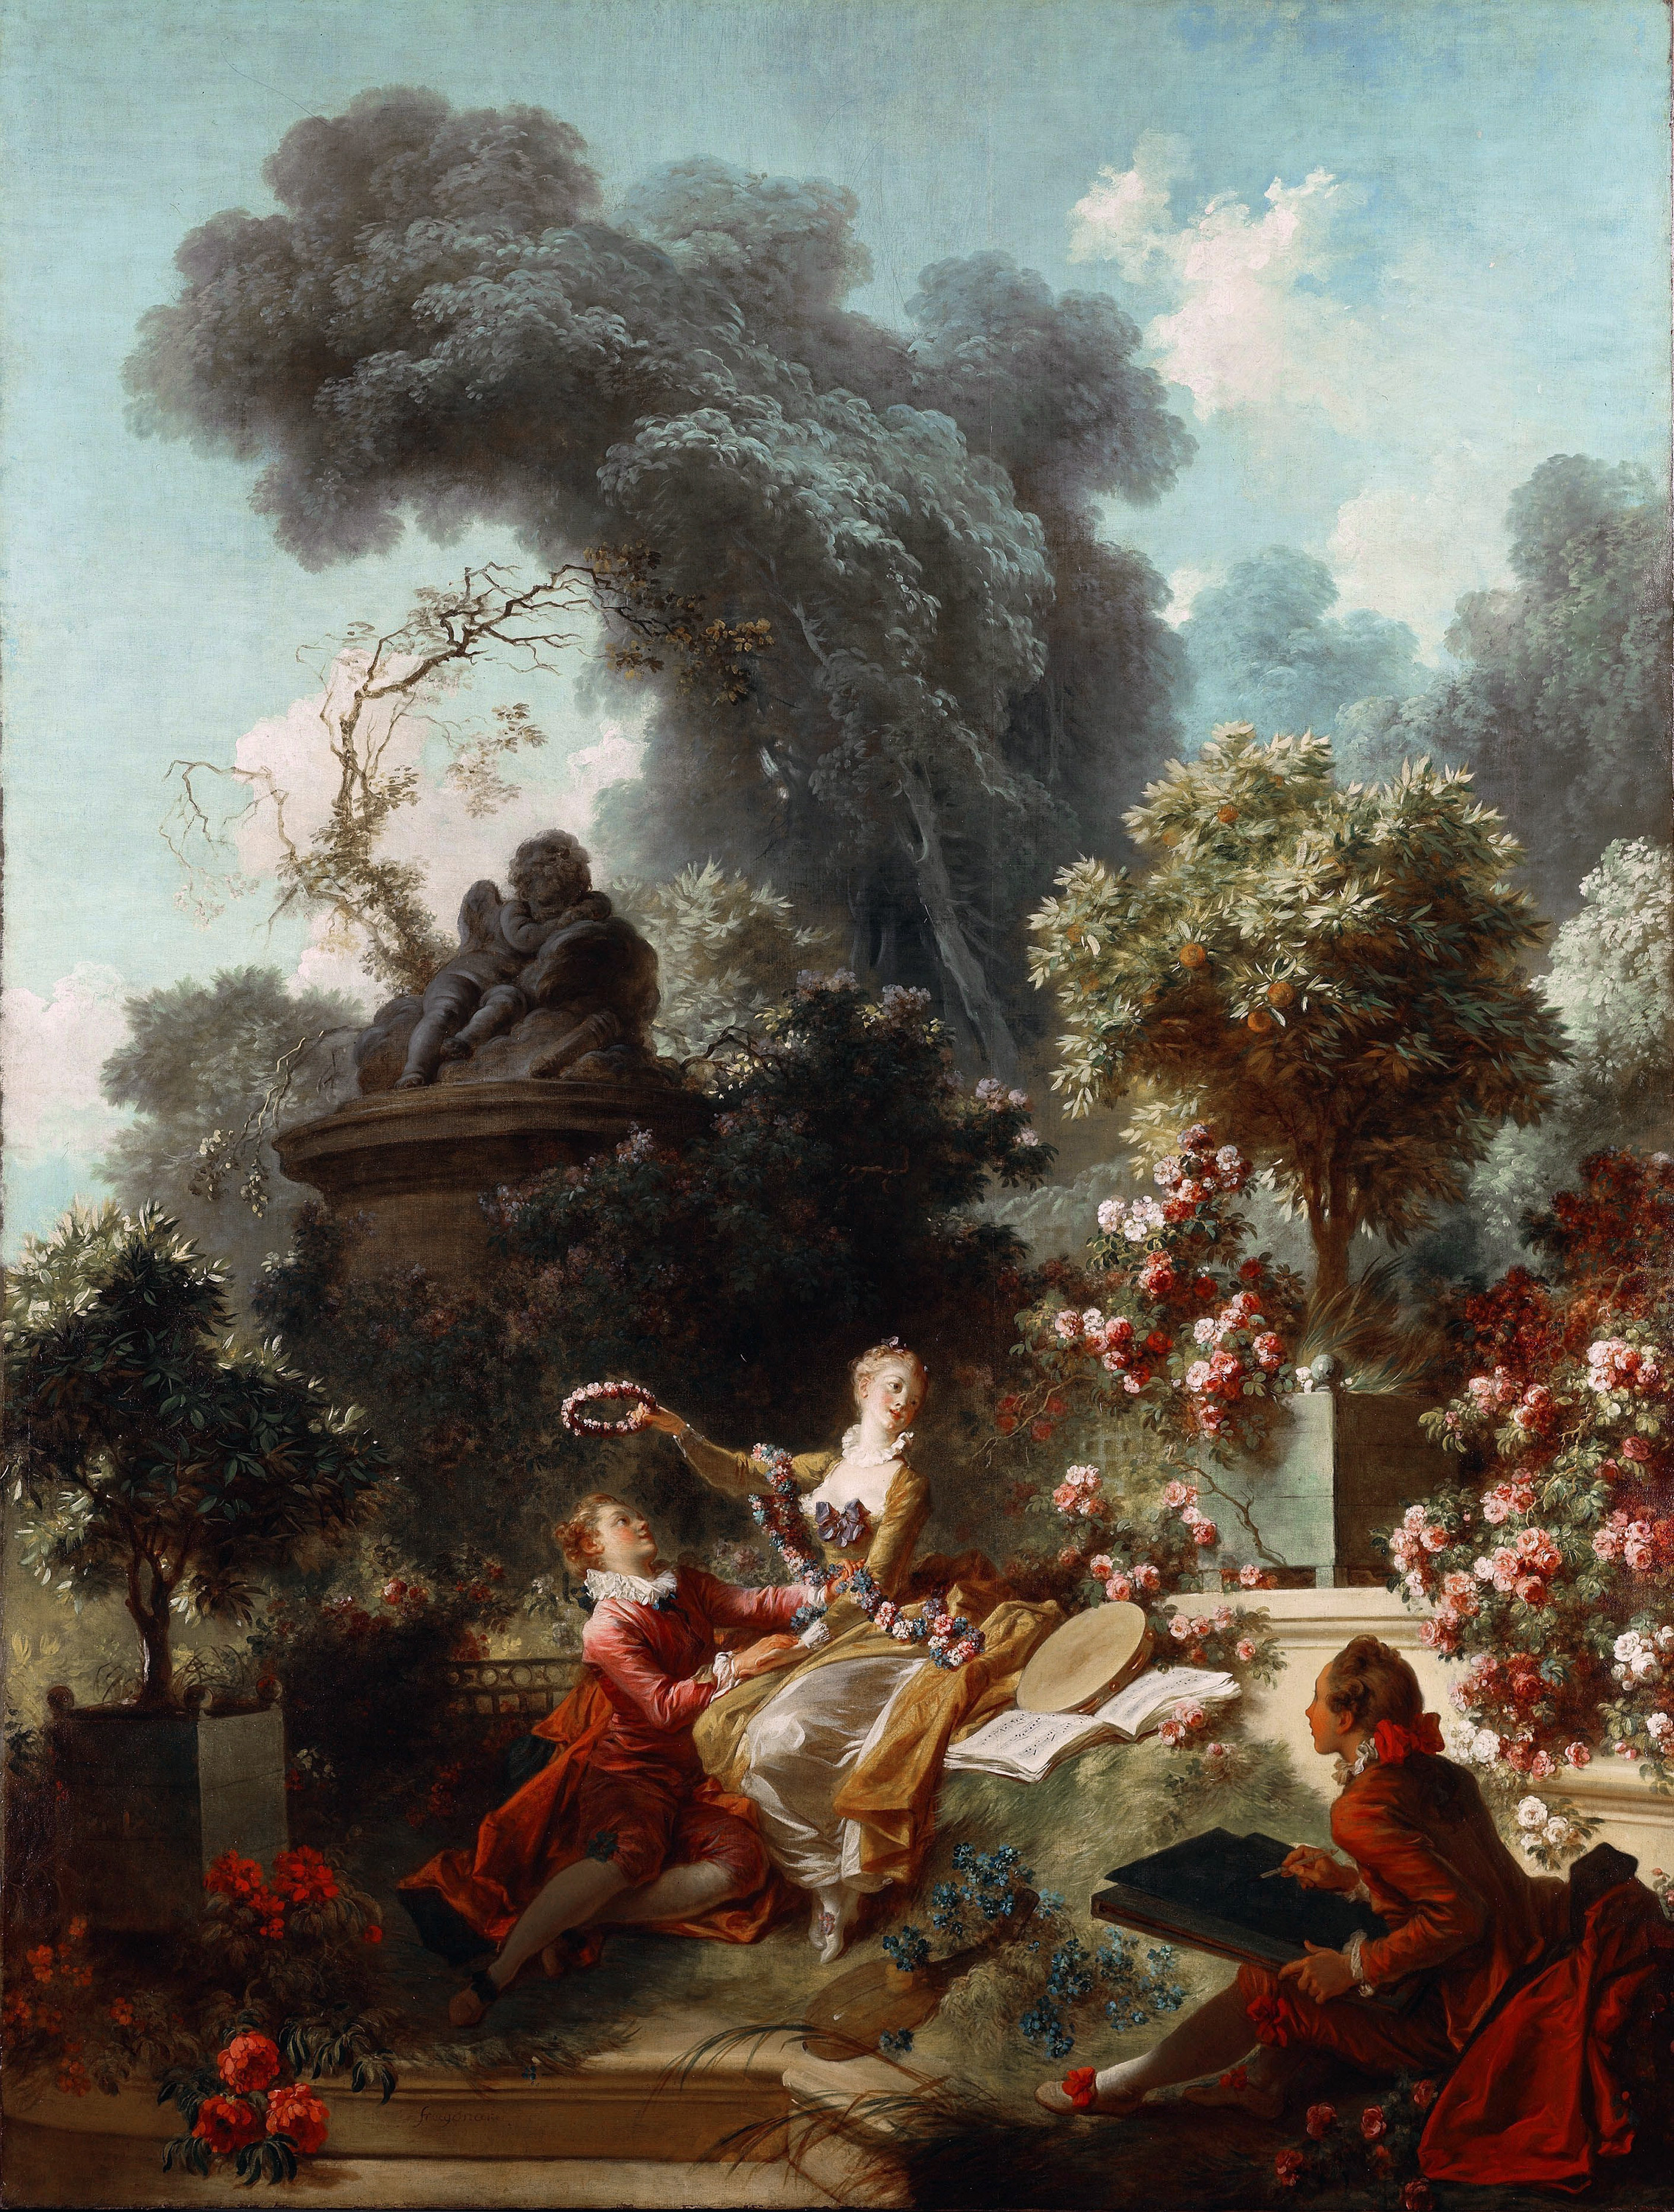 The Love Letter Painting Jean Honore Fragonard at PaintingValley.com ...